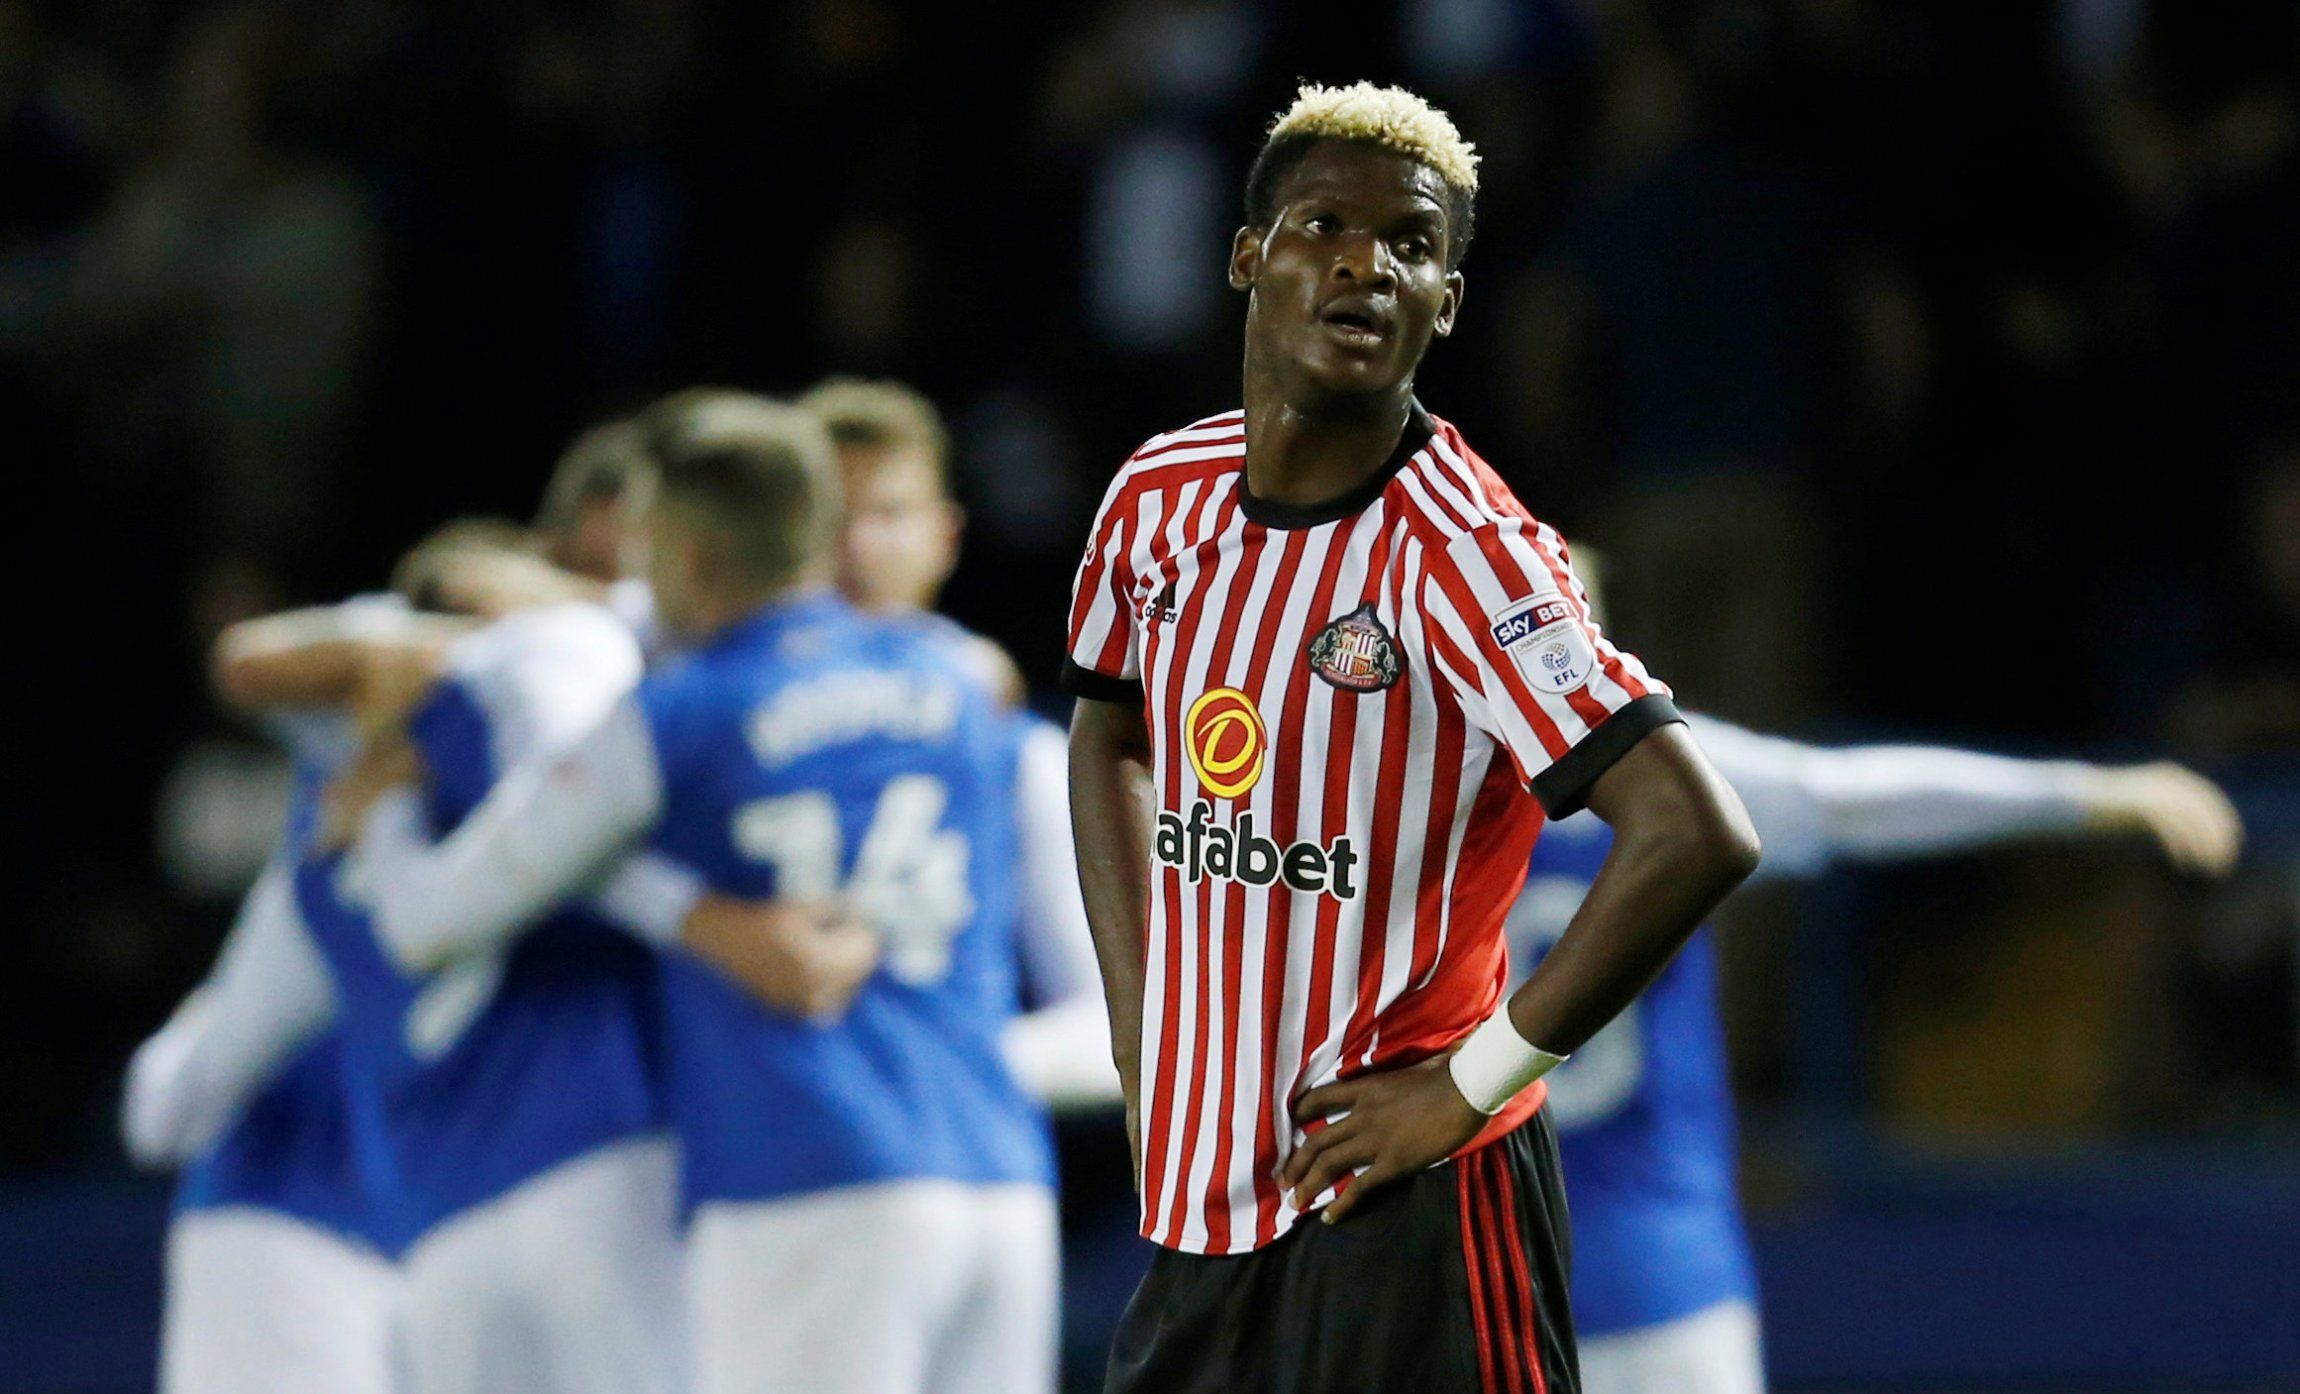 Didier Ndong for Sunderland